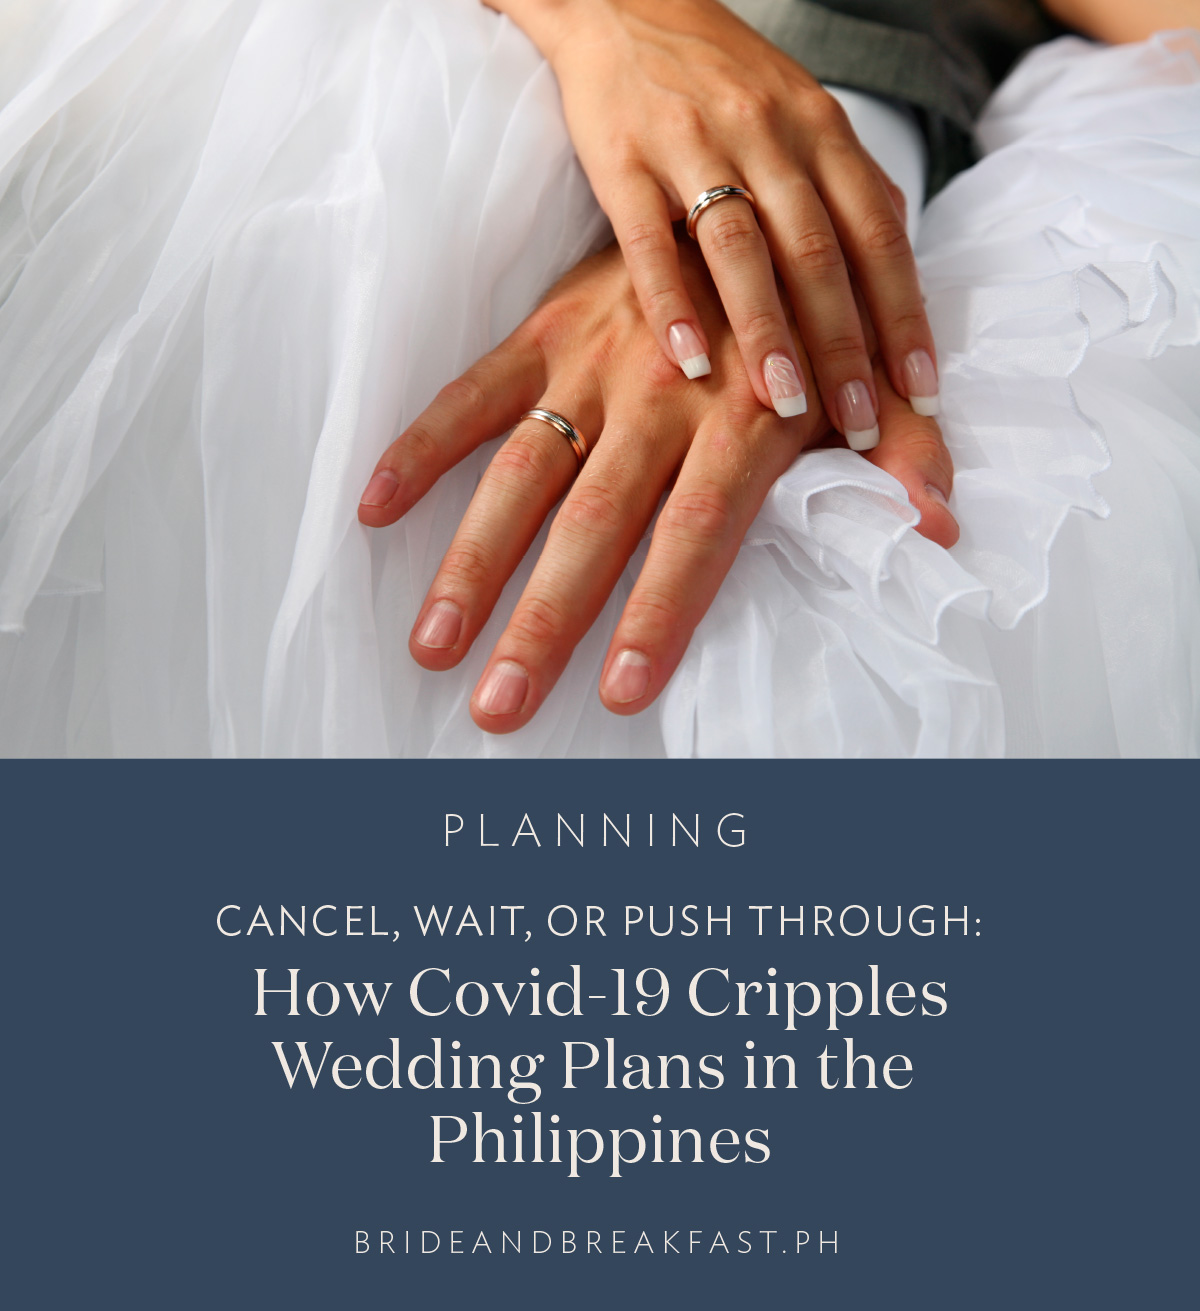 Cancel, Wait, or Push Through: How Covid-19 Cripples Wedding Plans in the Philippines